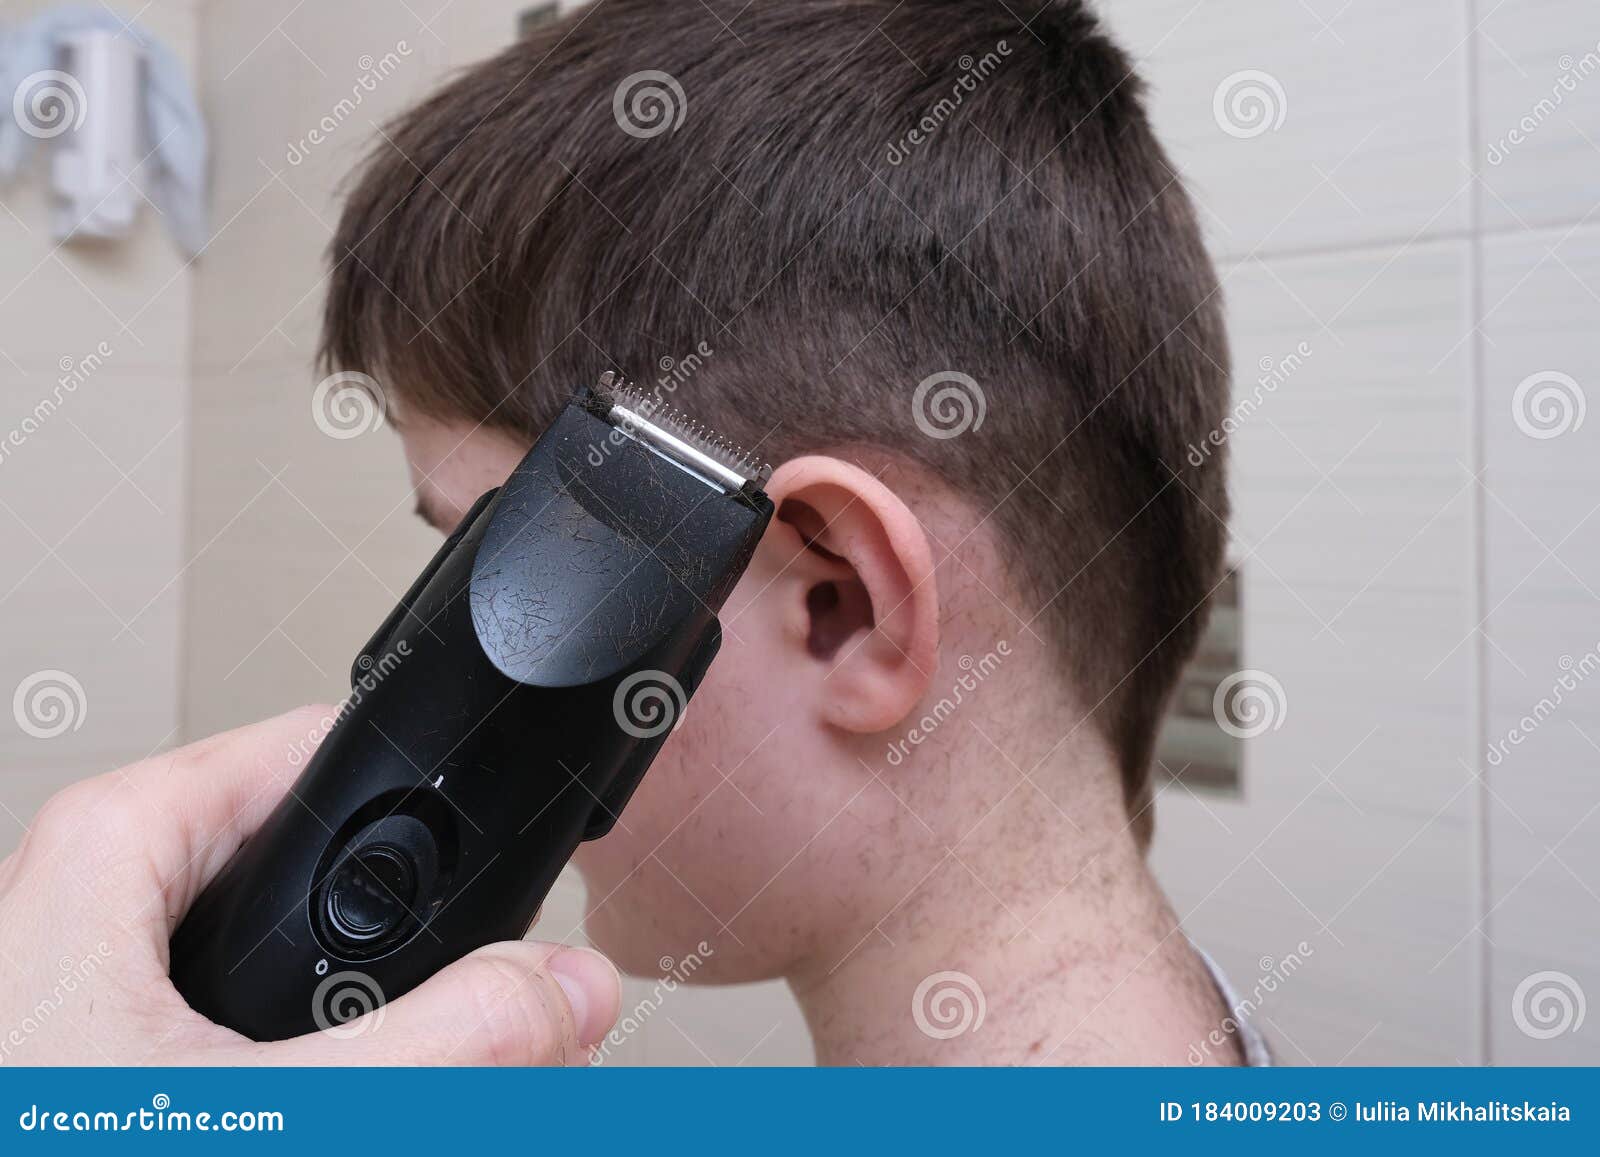 A Hand Holding Electric Hair Clipper and Going To Make a Boy Haircut at Home  in the Bathroom, Homemade Hairstyle Stock Image - Image of hairstyle, hair:  184009203